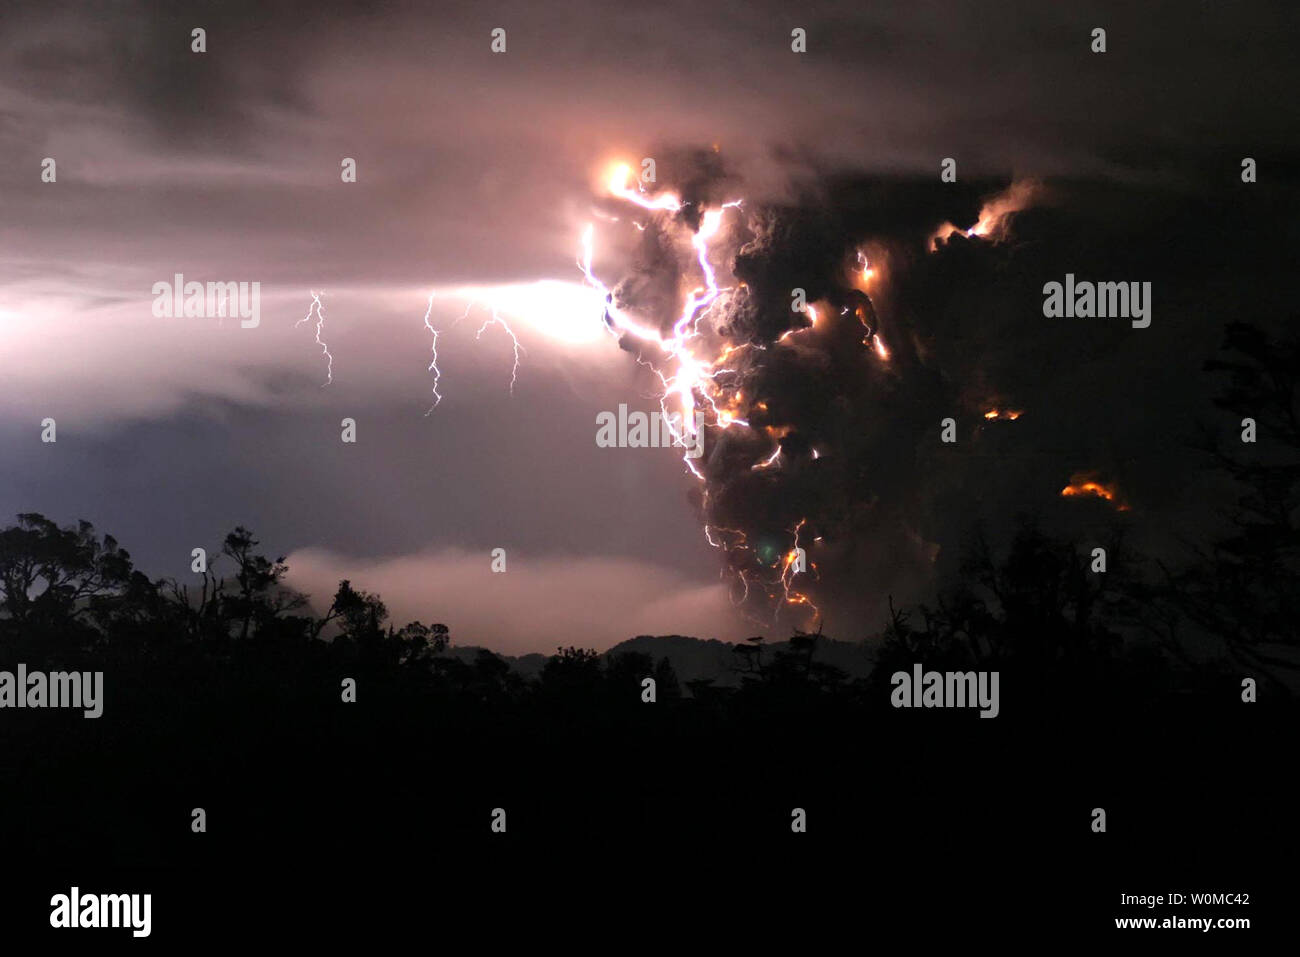 The Chaiten volcano erupts during storms in the middle of the night on May 3, 2008 in Chaiten, Chile.  The Chaiten volcano, located some 800 miles south of the capital Santiago, was considered dormant since it had not erupted for hundreds of years. Thousands of people have been evacuated from the area.   (UPI Photo/Carlos Gutierrez) Stock Photo